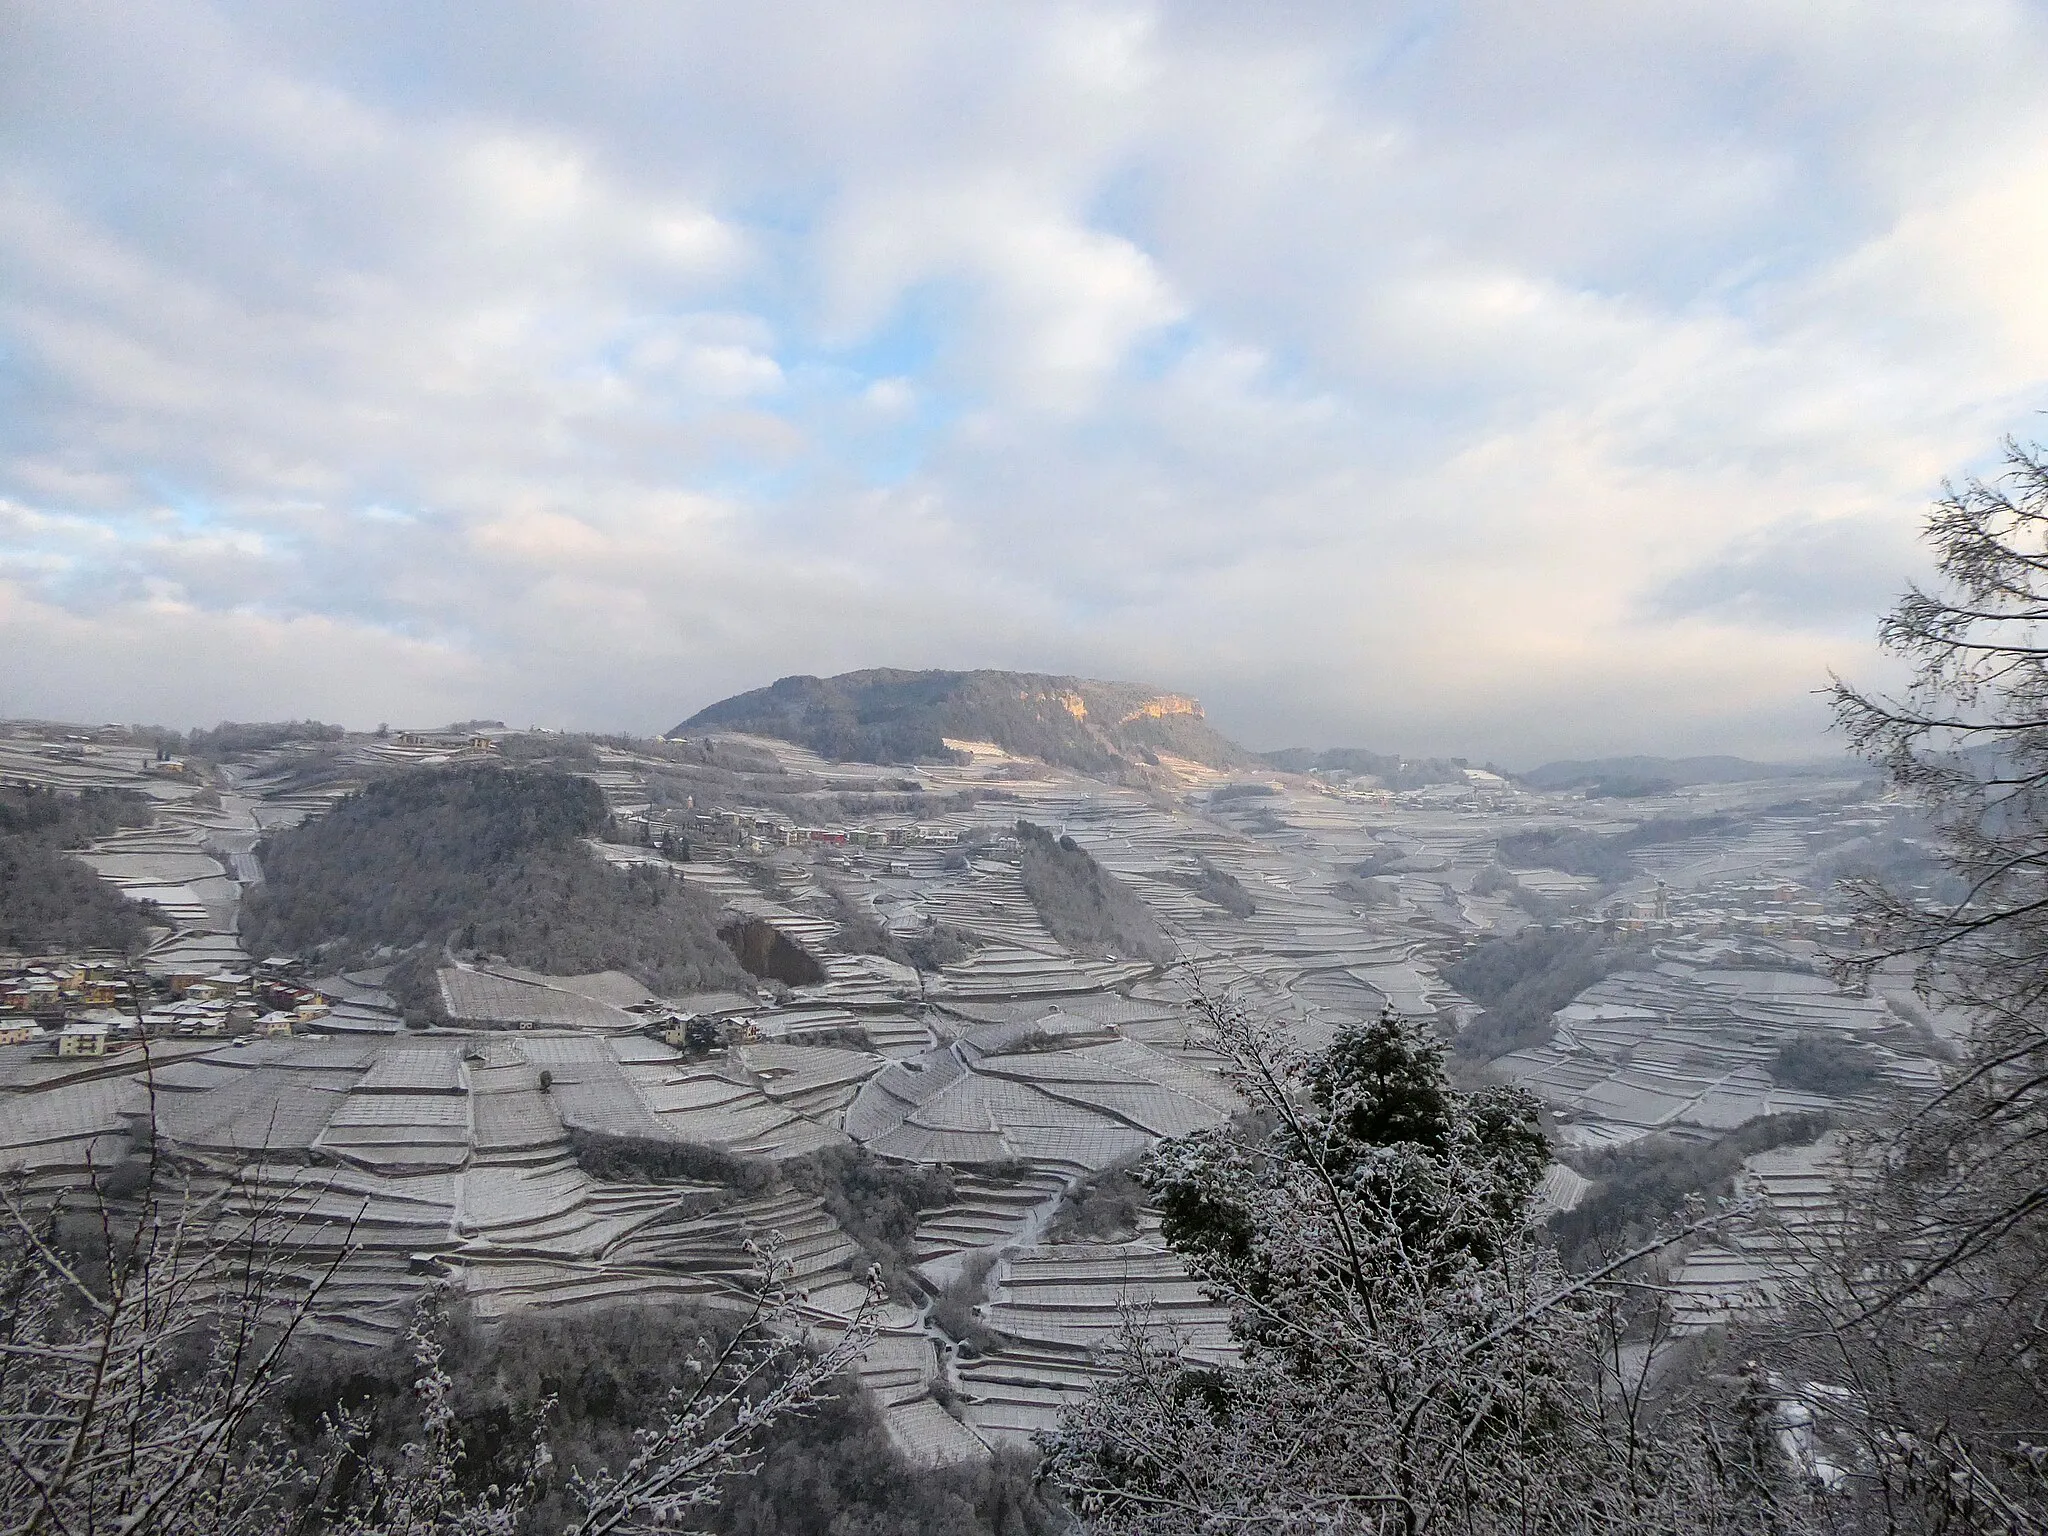 Photo showing: The municipality of Giovo (Trentino, Italy) in winter